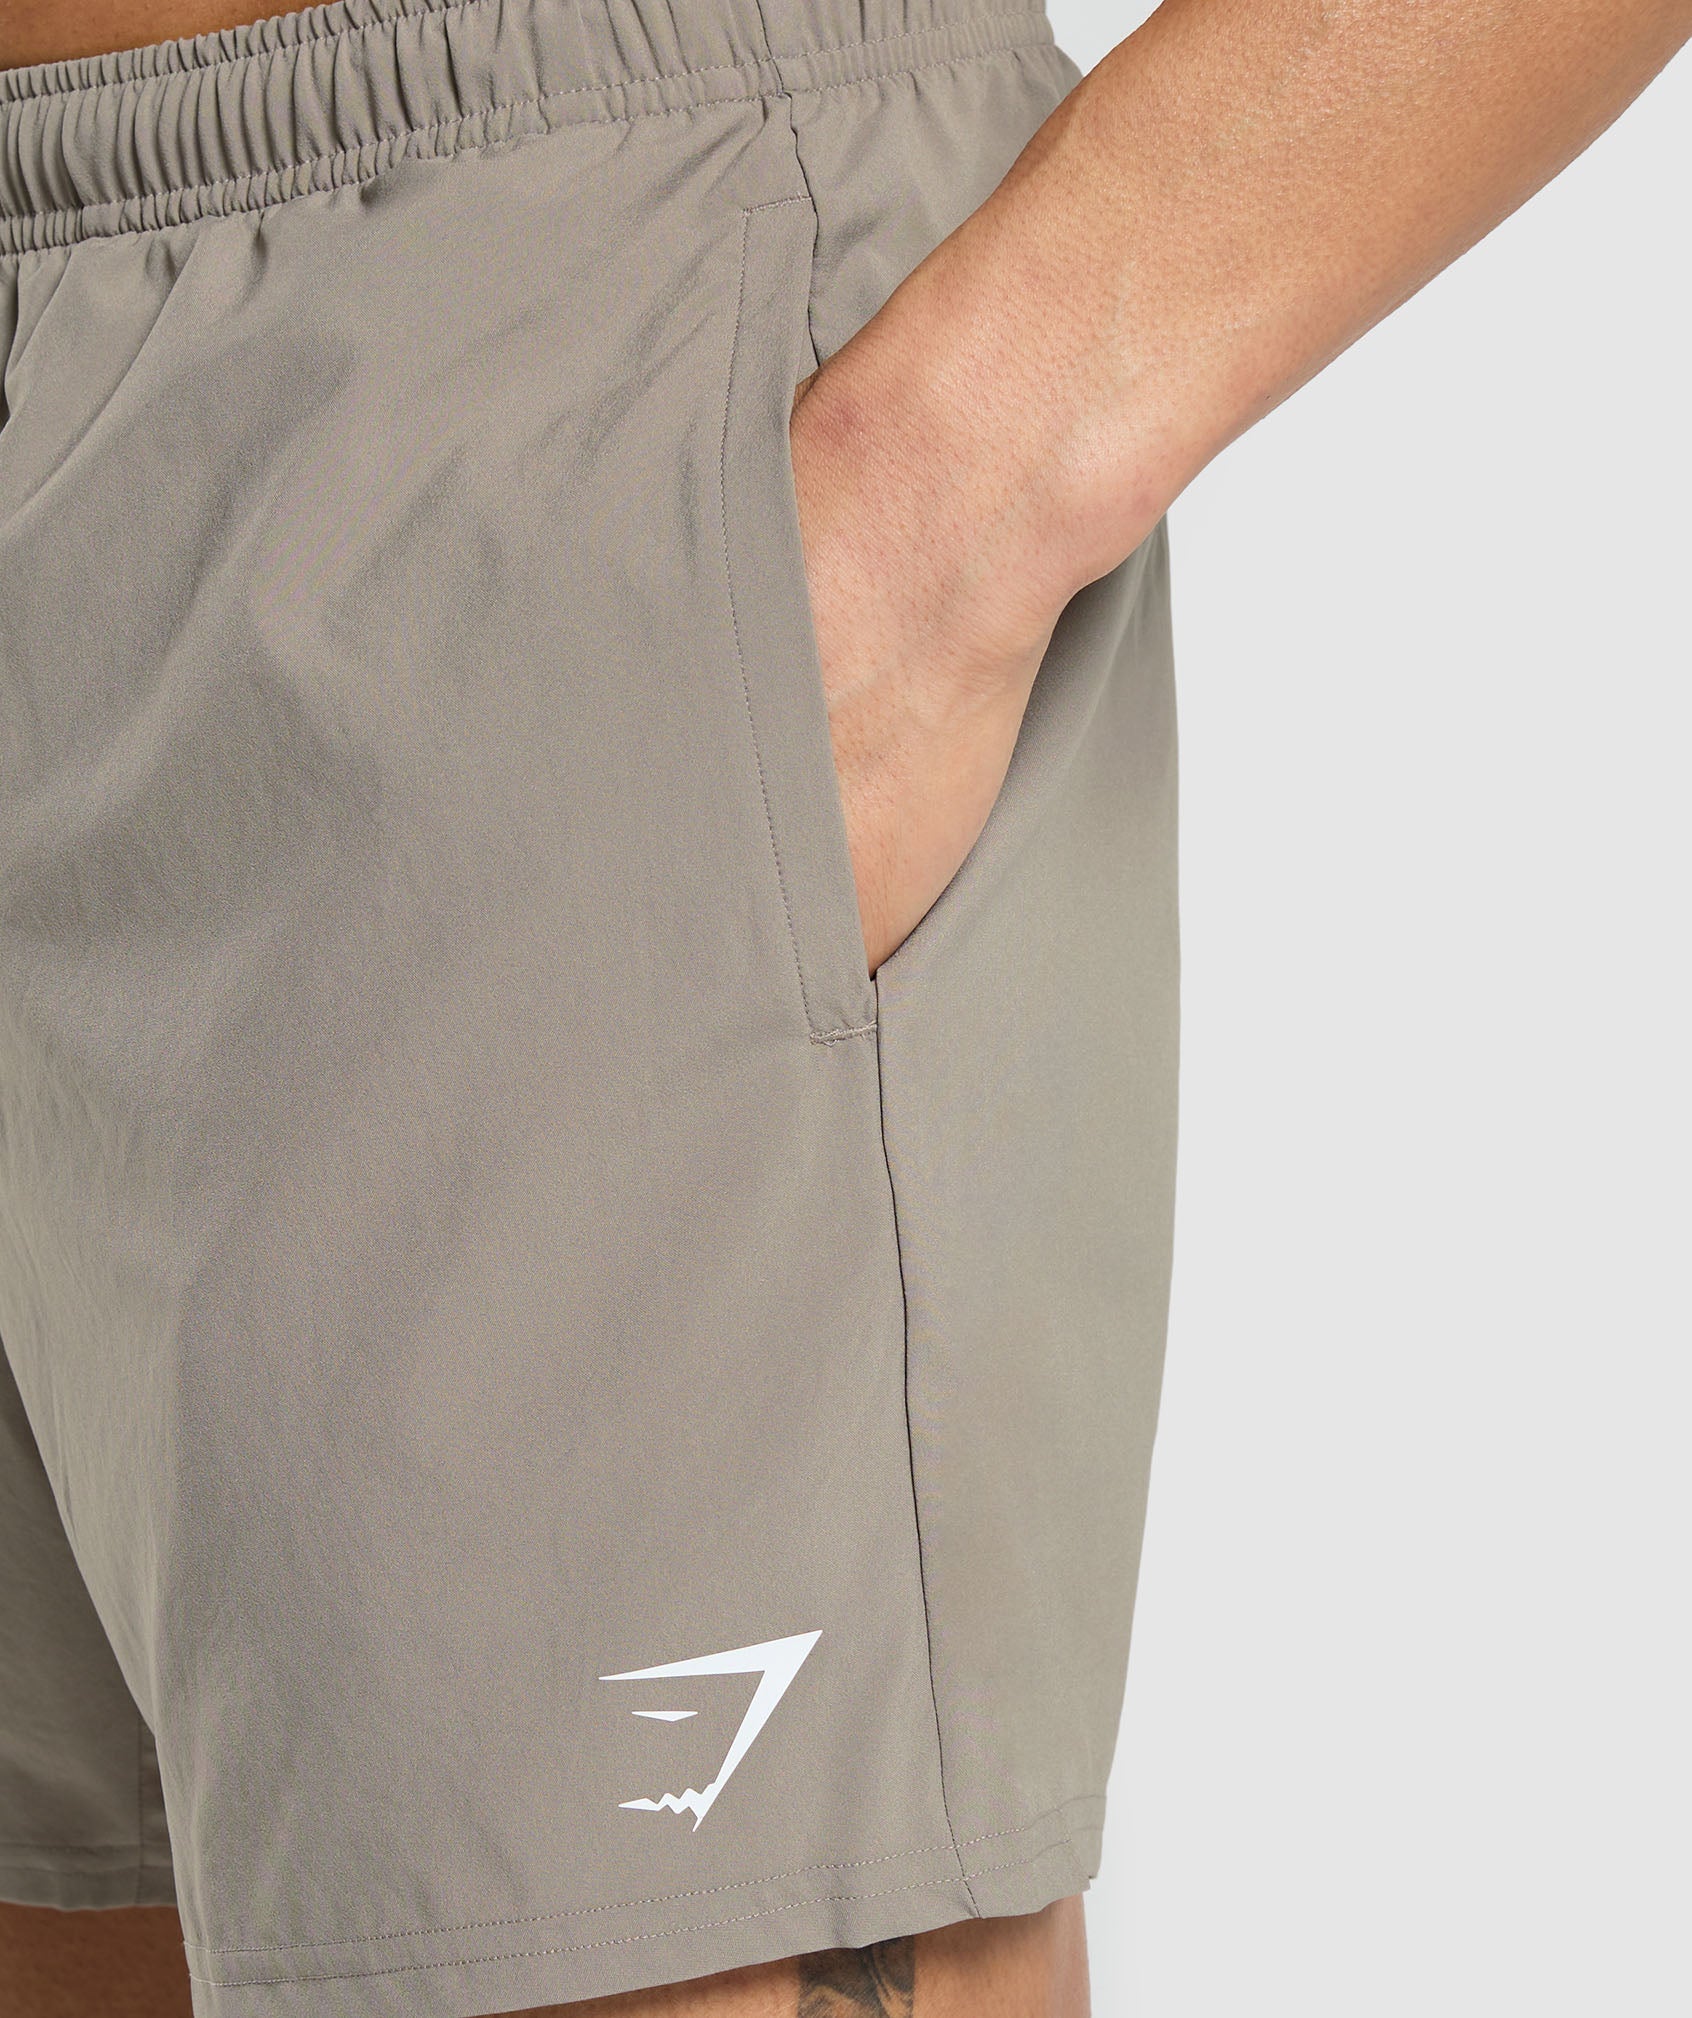 Arrival 5" Shorts in Linen Brown - view 6